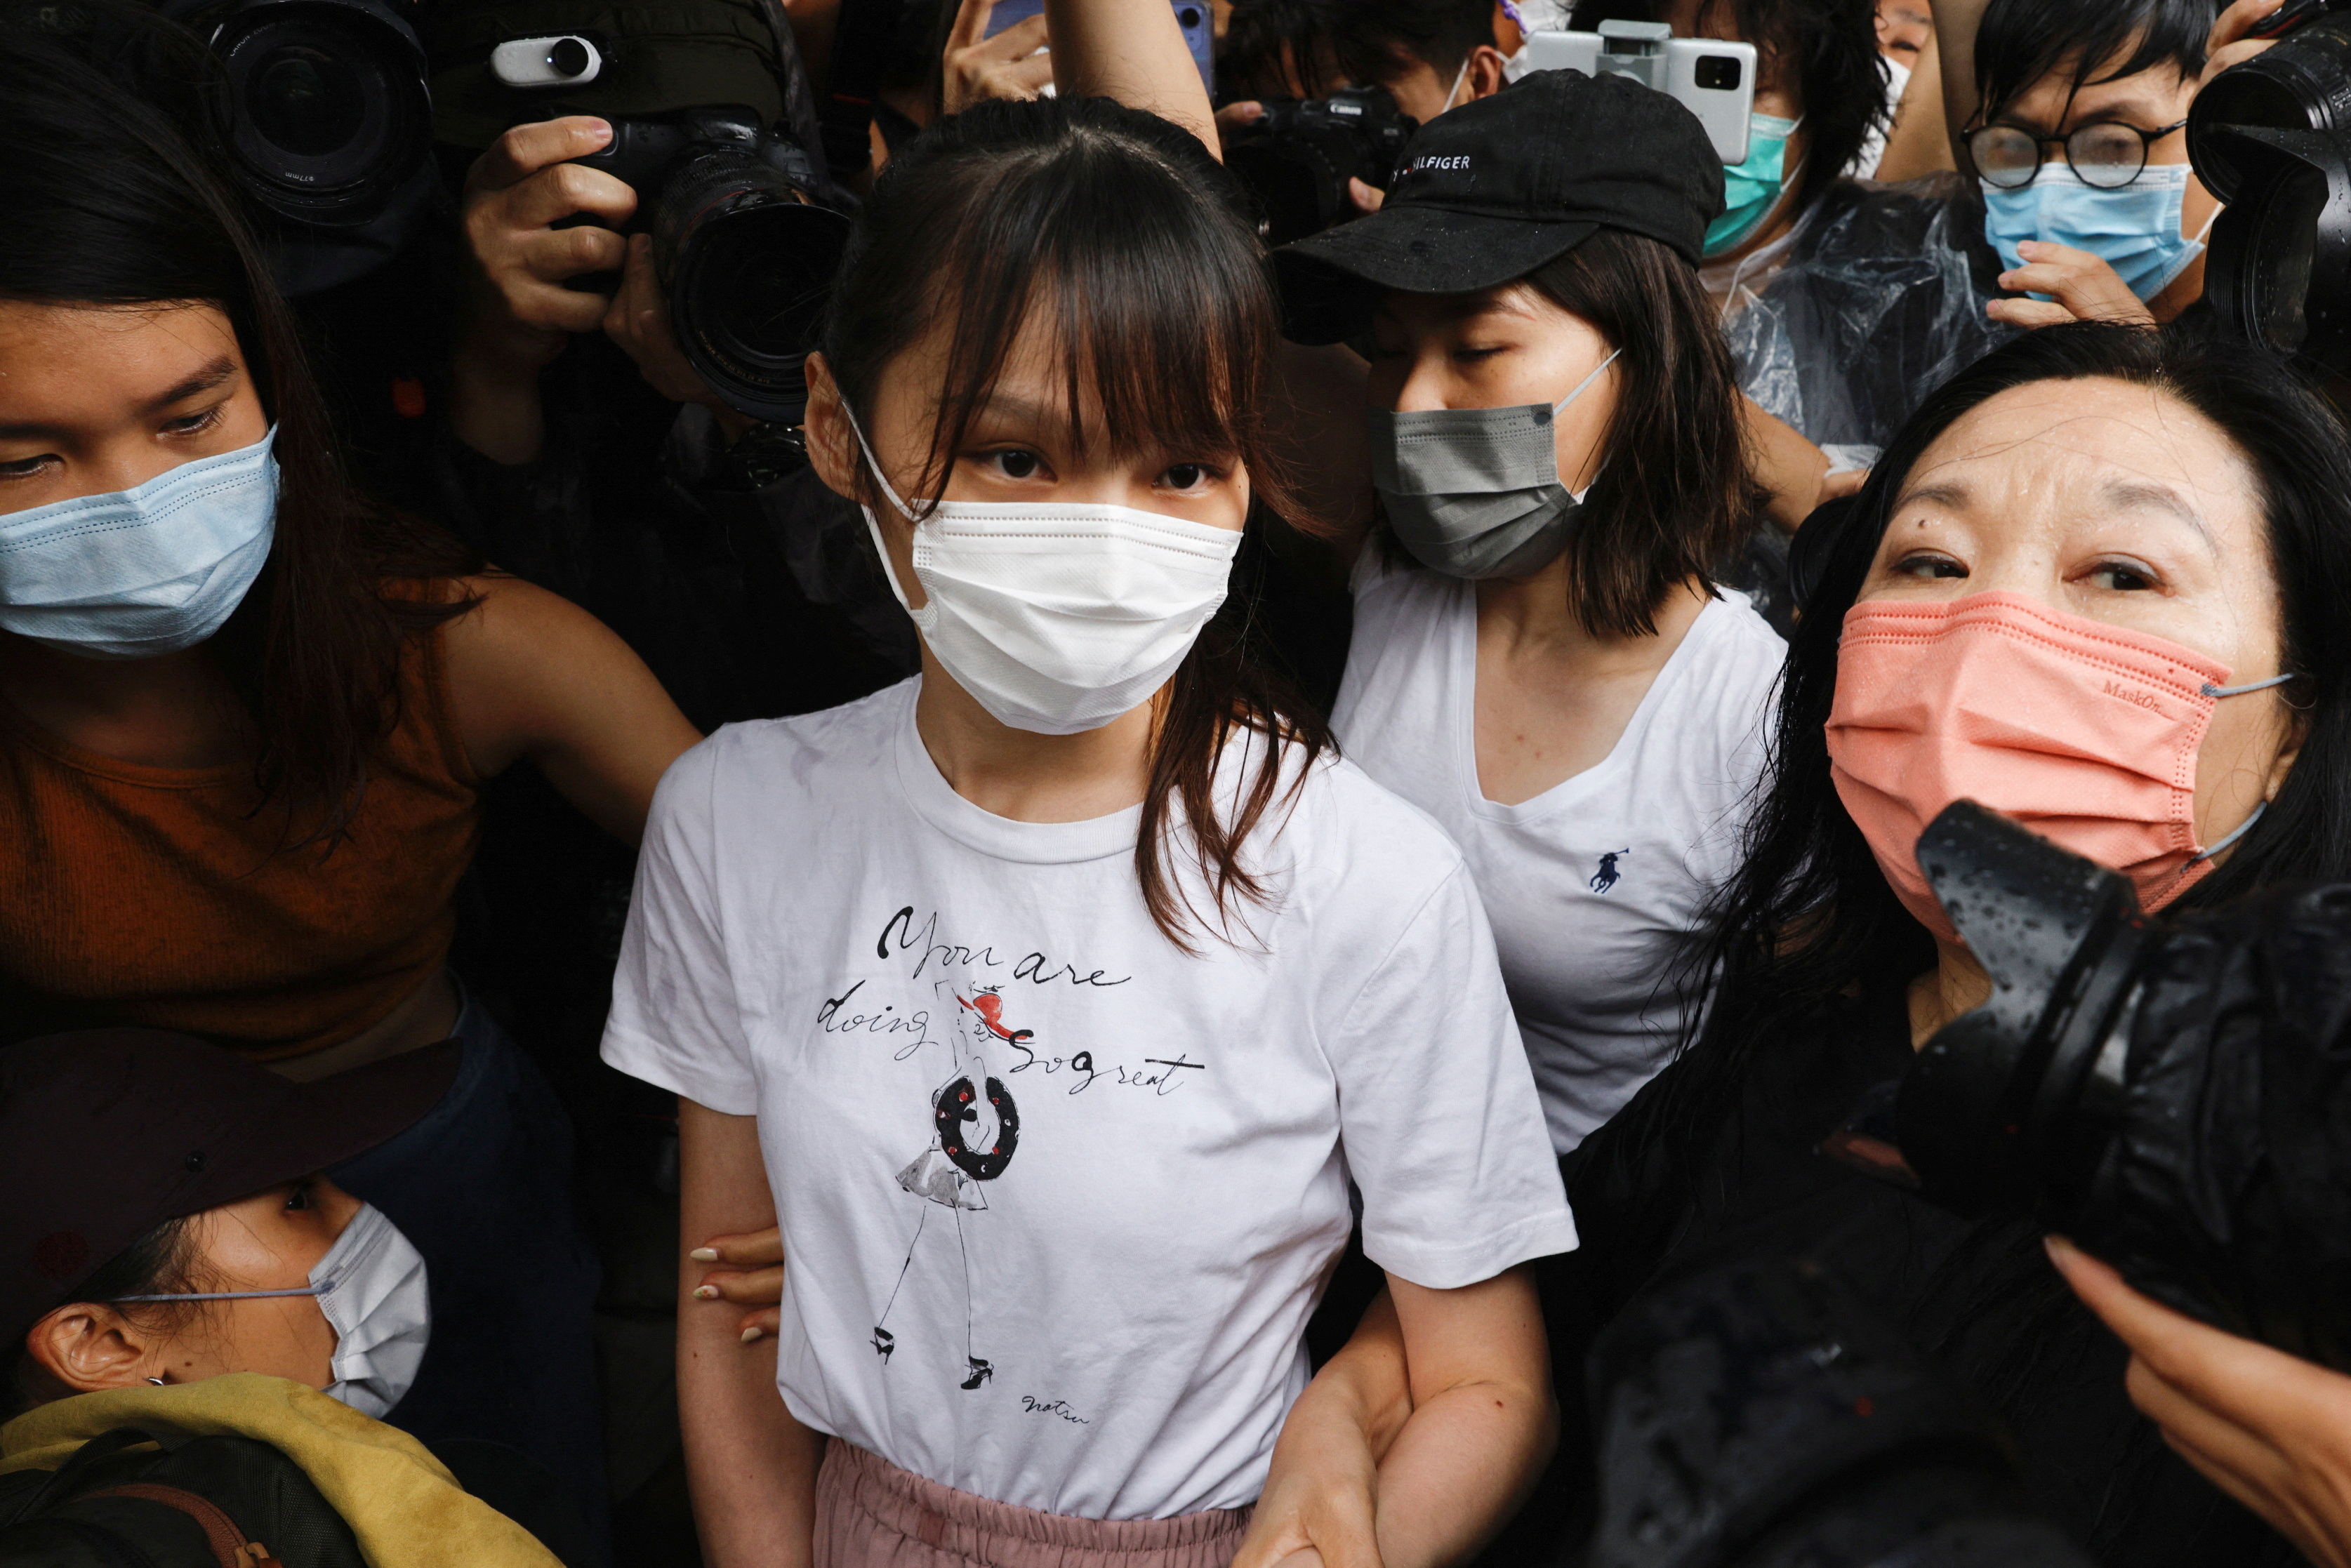 Pro-democracy activist Agnes Chow releases from prison after serving nearly seven months for her role in an unauthorised assembly during the city's 2019 anti-government protests, in Hong Kong